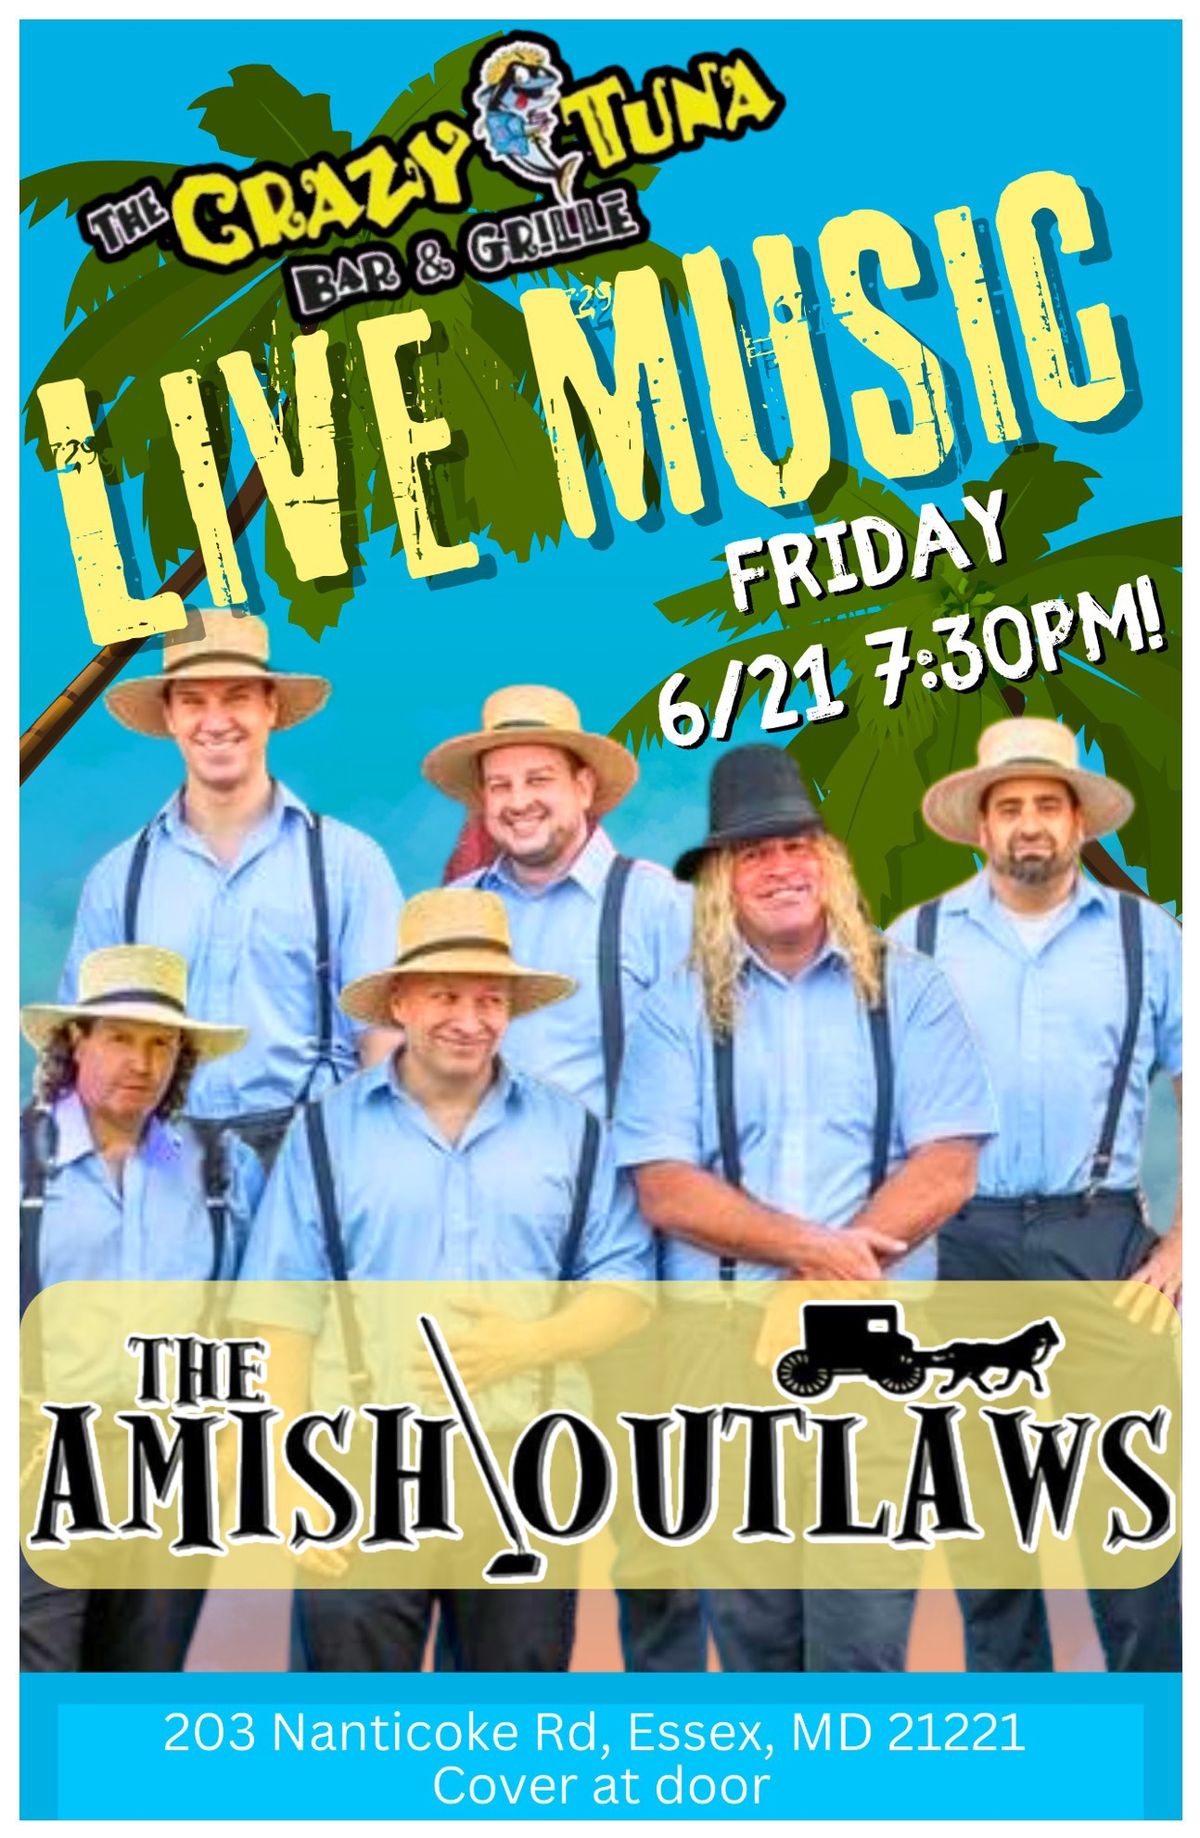 The Amish Outlaws take over the beach at The Crazy Tuna! 